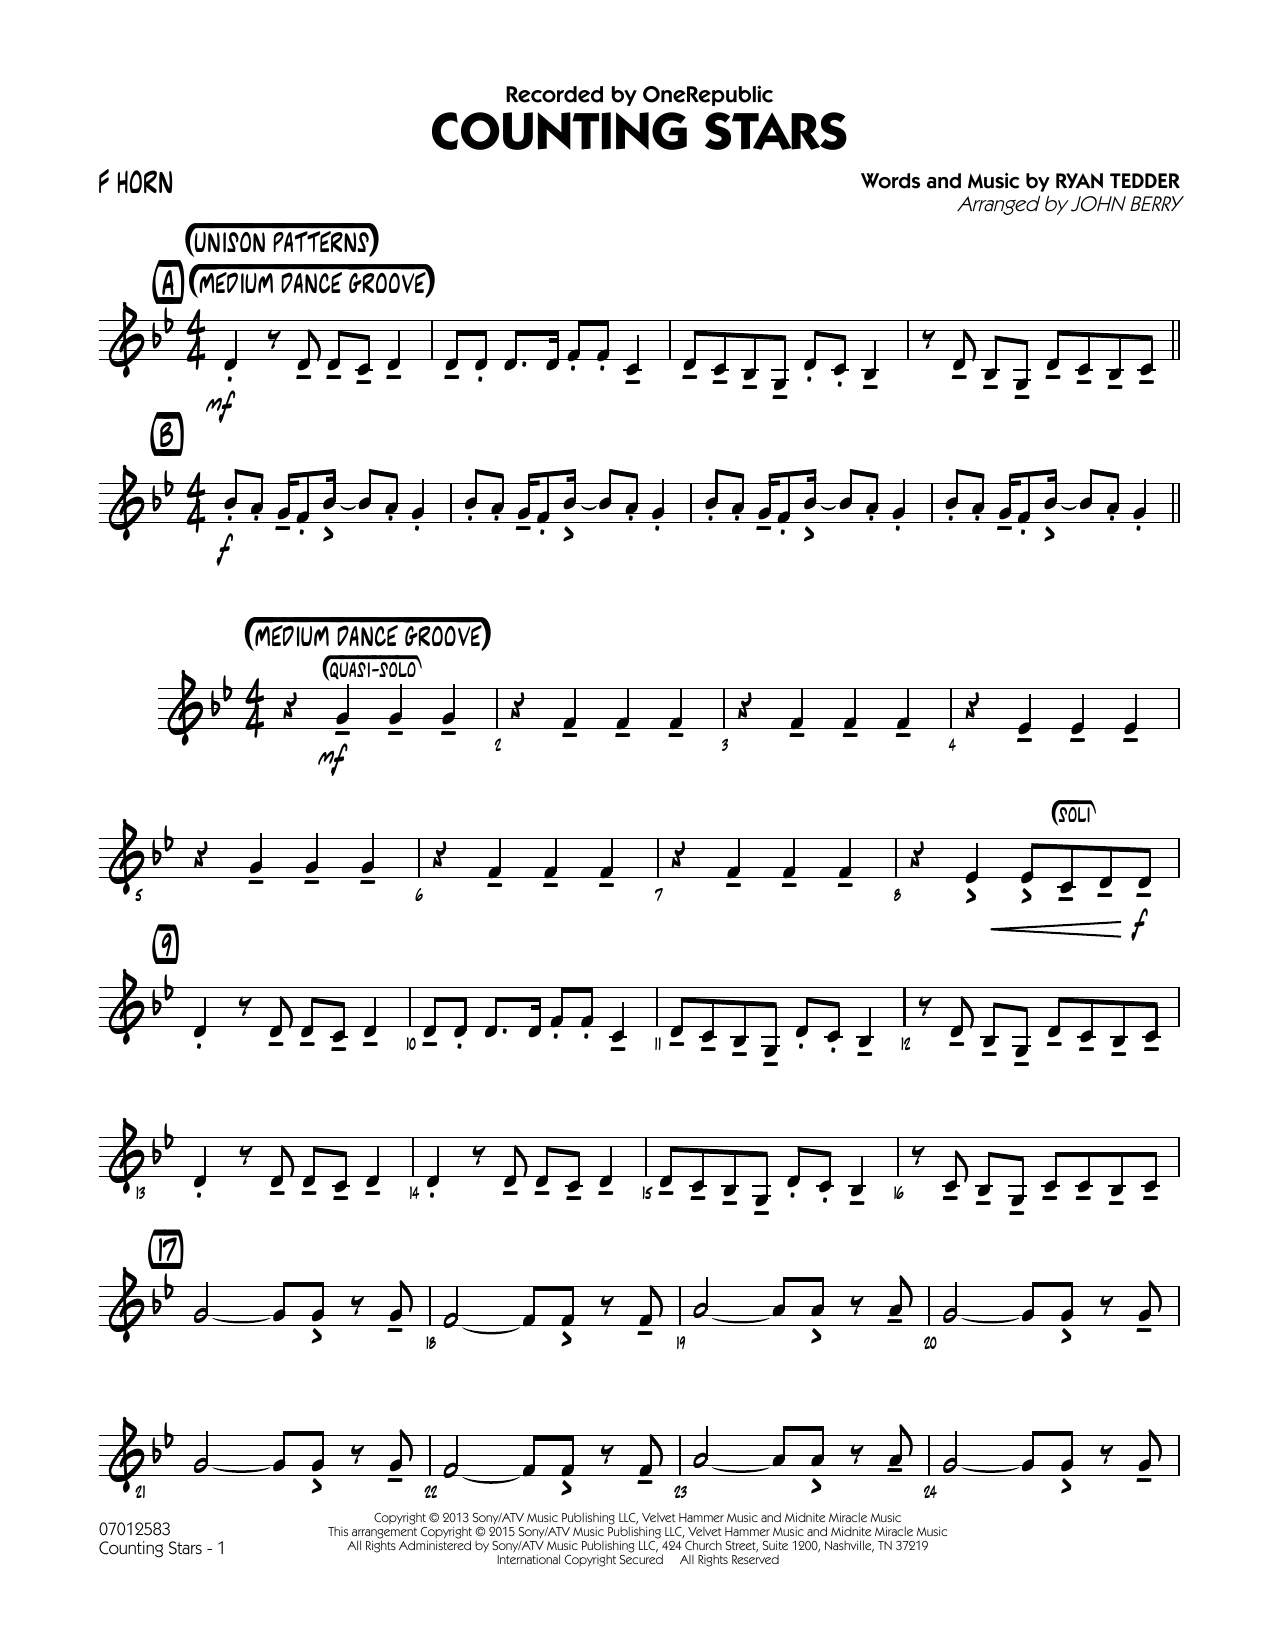 John Berry Counting Stars - F Horn sheet music notes and chords. Download Printable PDF.